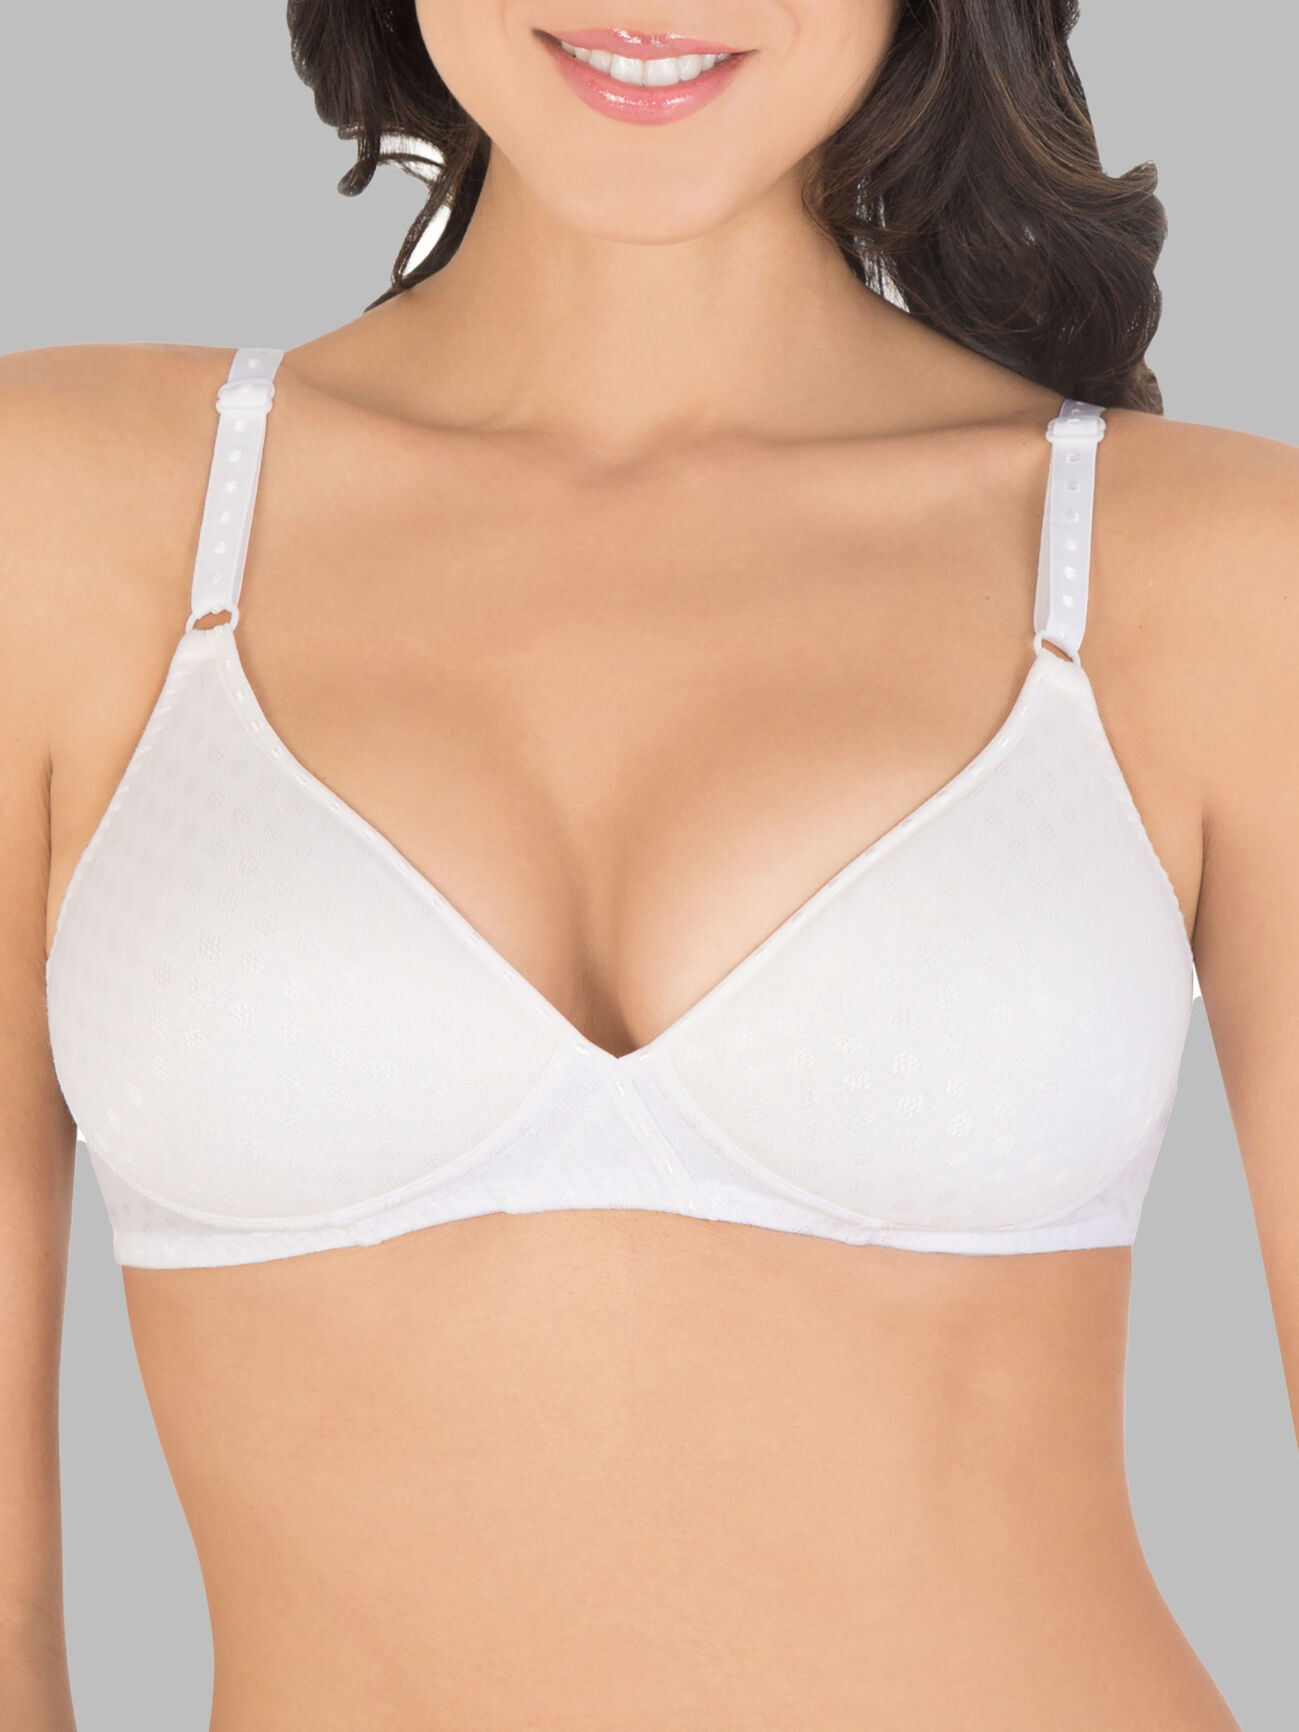 Women's Fruit Of The Loom 96825 Seamed Wirefree Bra (White 38C)